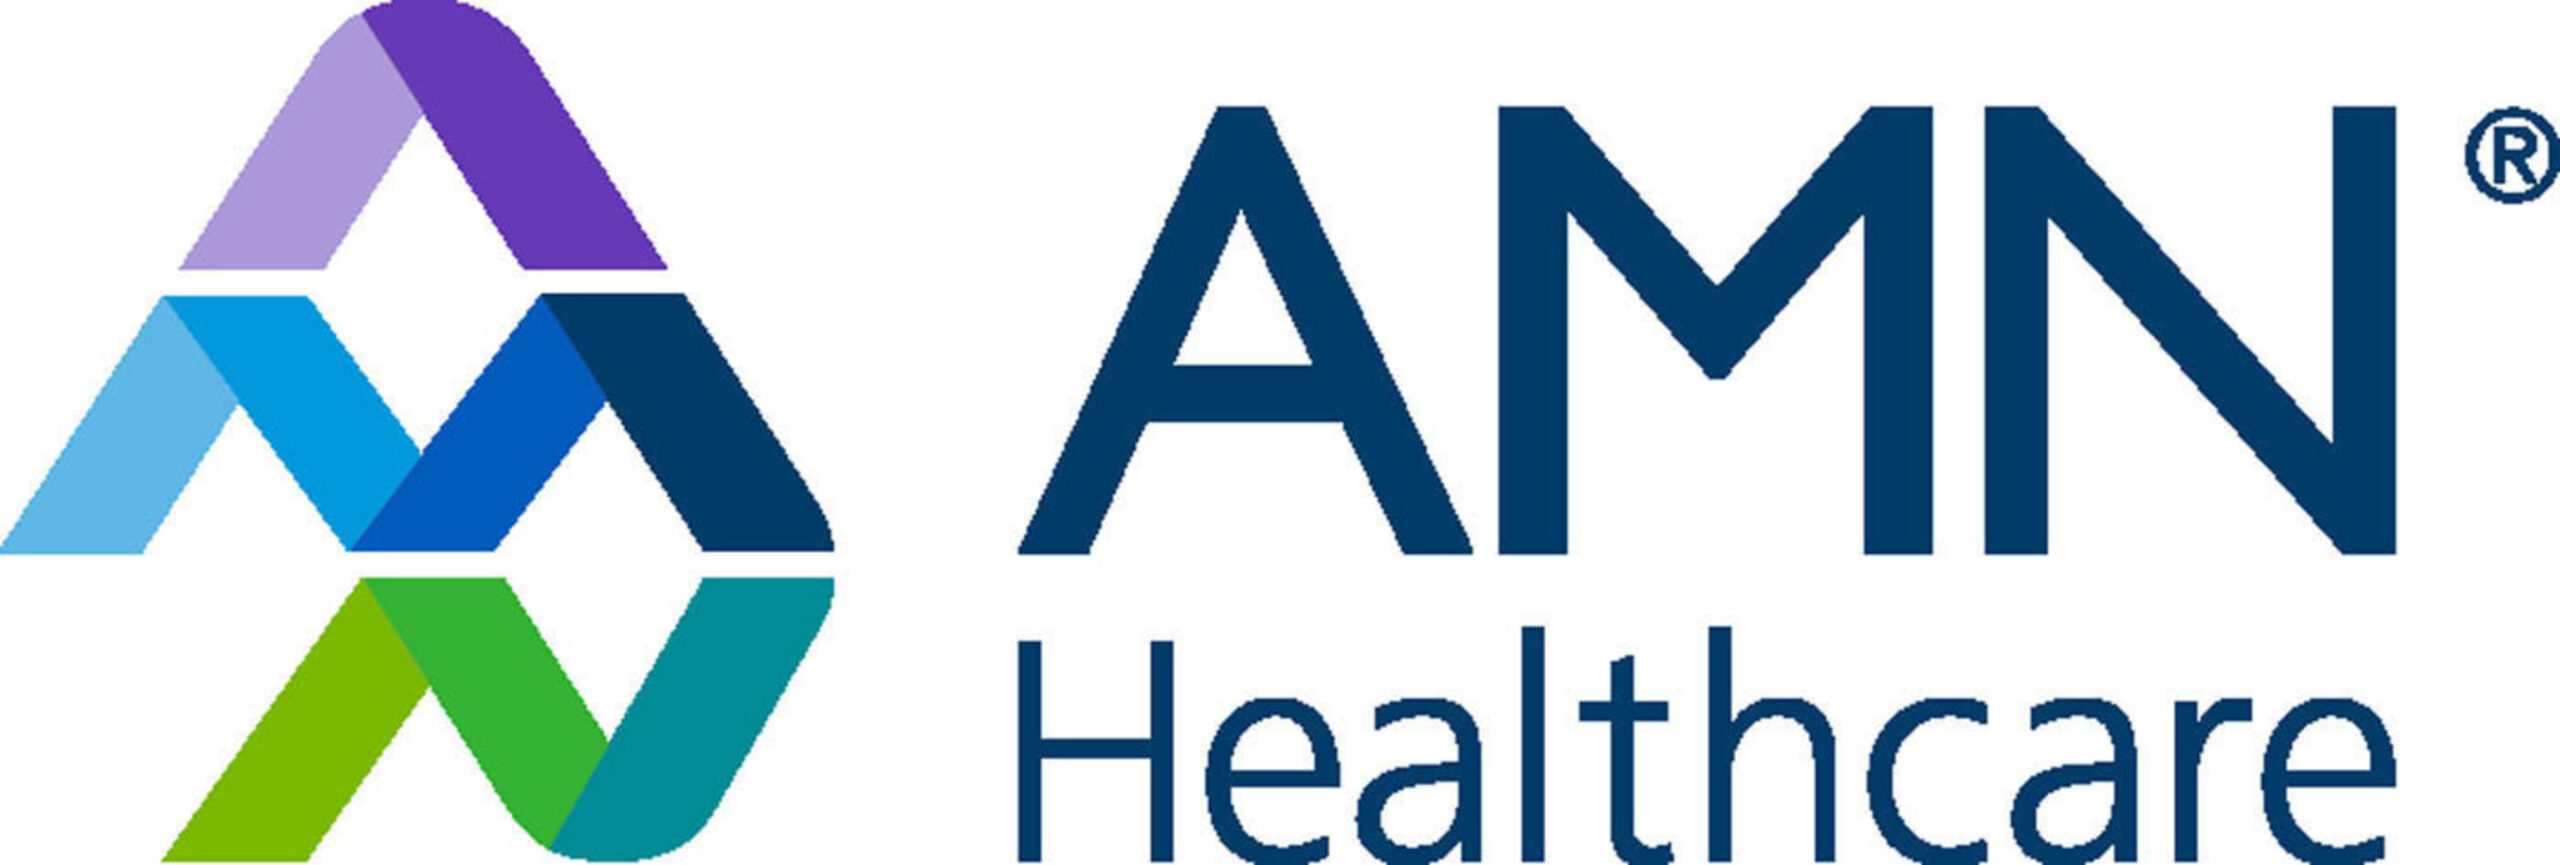 Ethisphere Recognizes AMN Healthcare with Compliance Leader Verification™